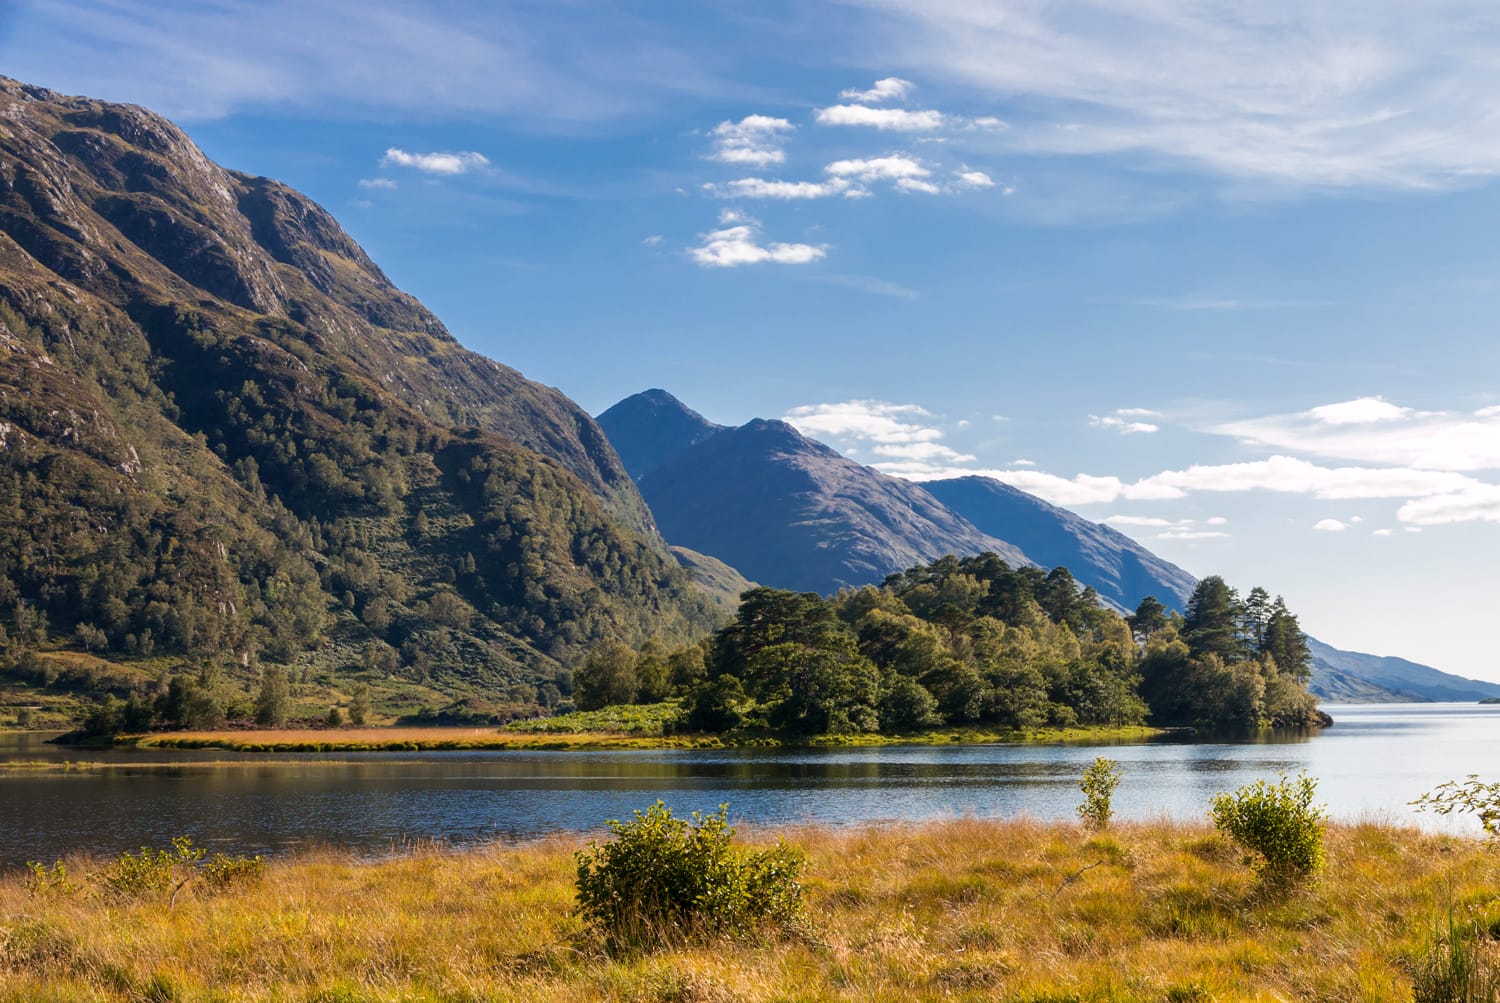 View onto beautiful Loch Shiel and the Scottish Highlands at the Glenfinnan Monument, Scotland, UK